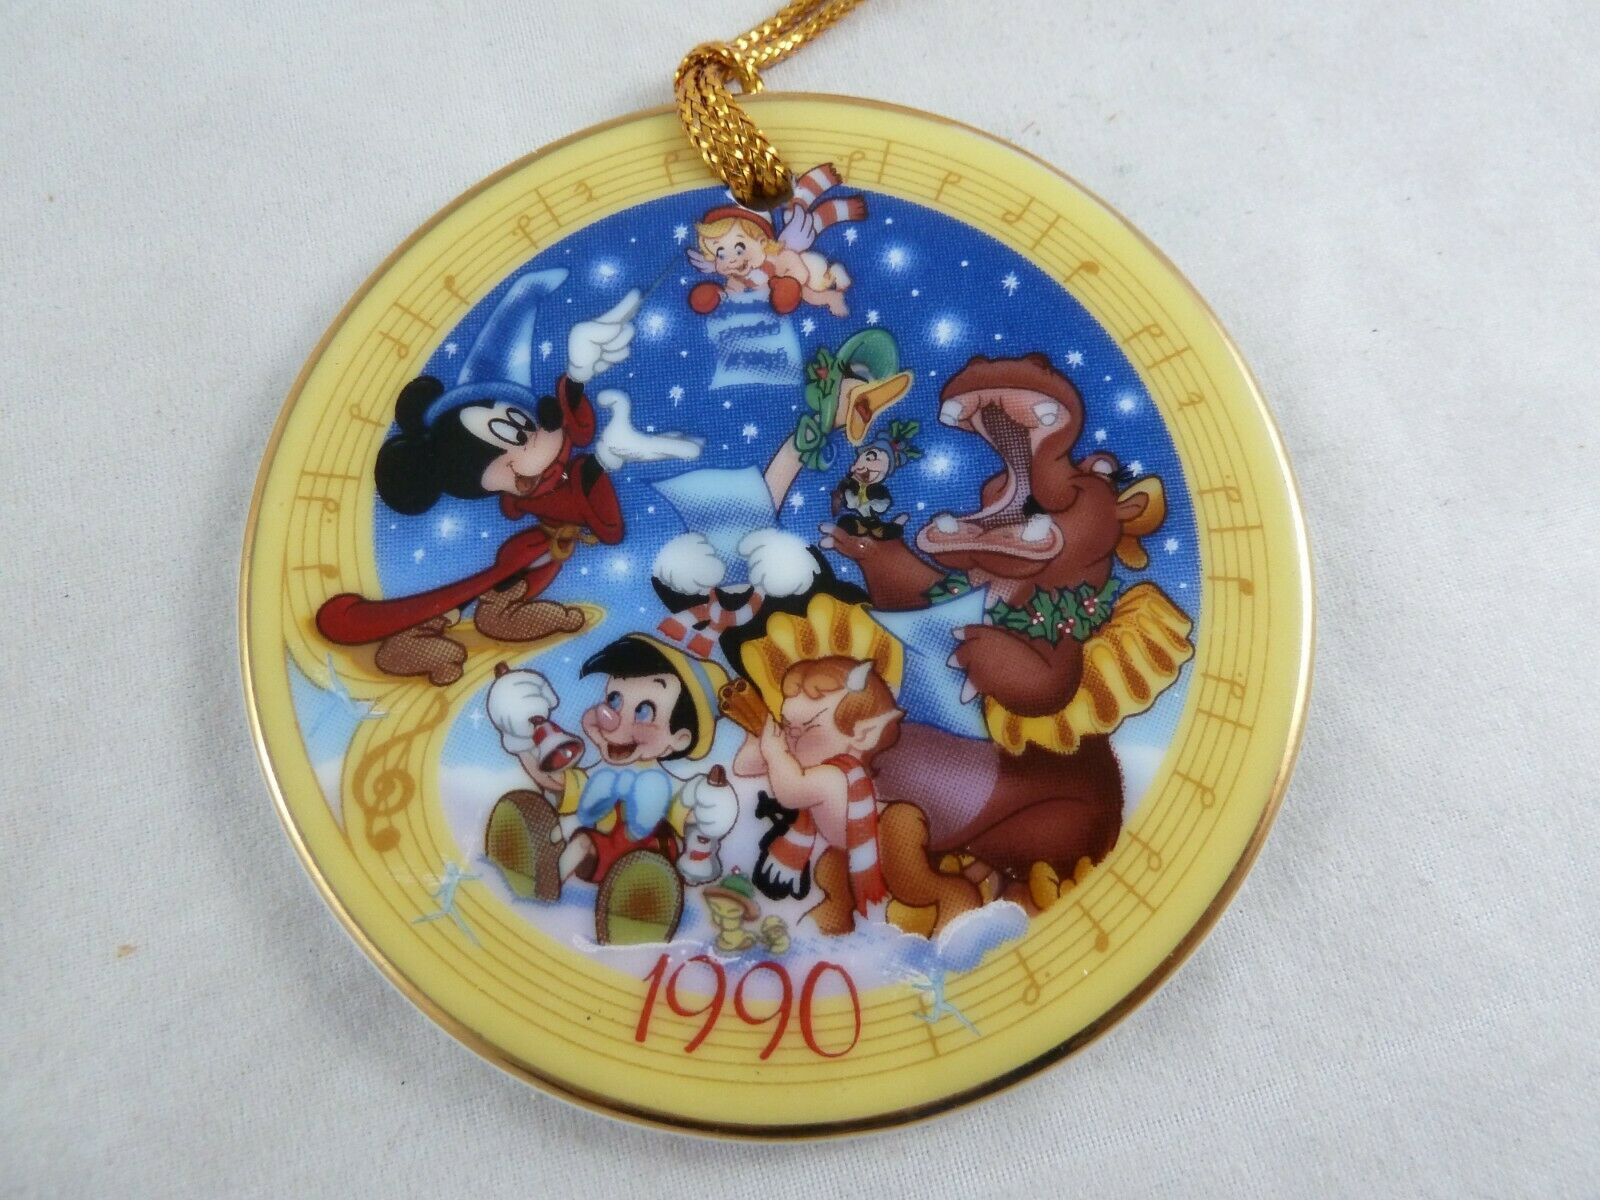 Vintage Disney Christmas Ornament  w mickey and Pinocchio and others 1990 - $8.90